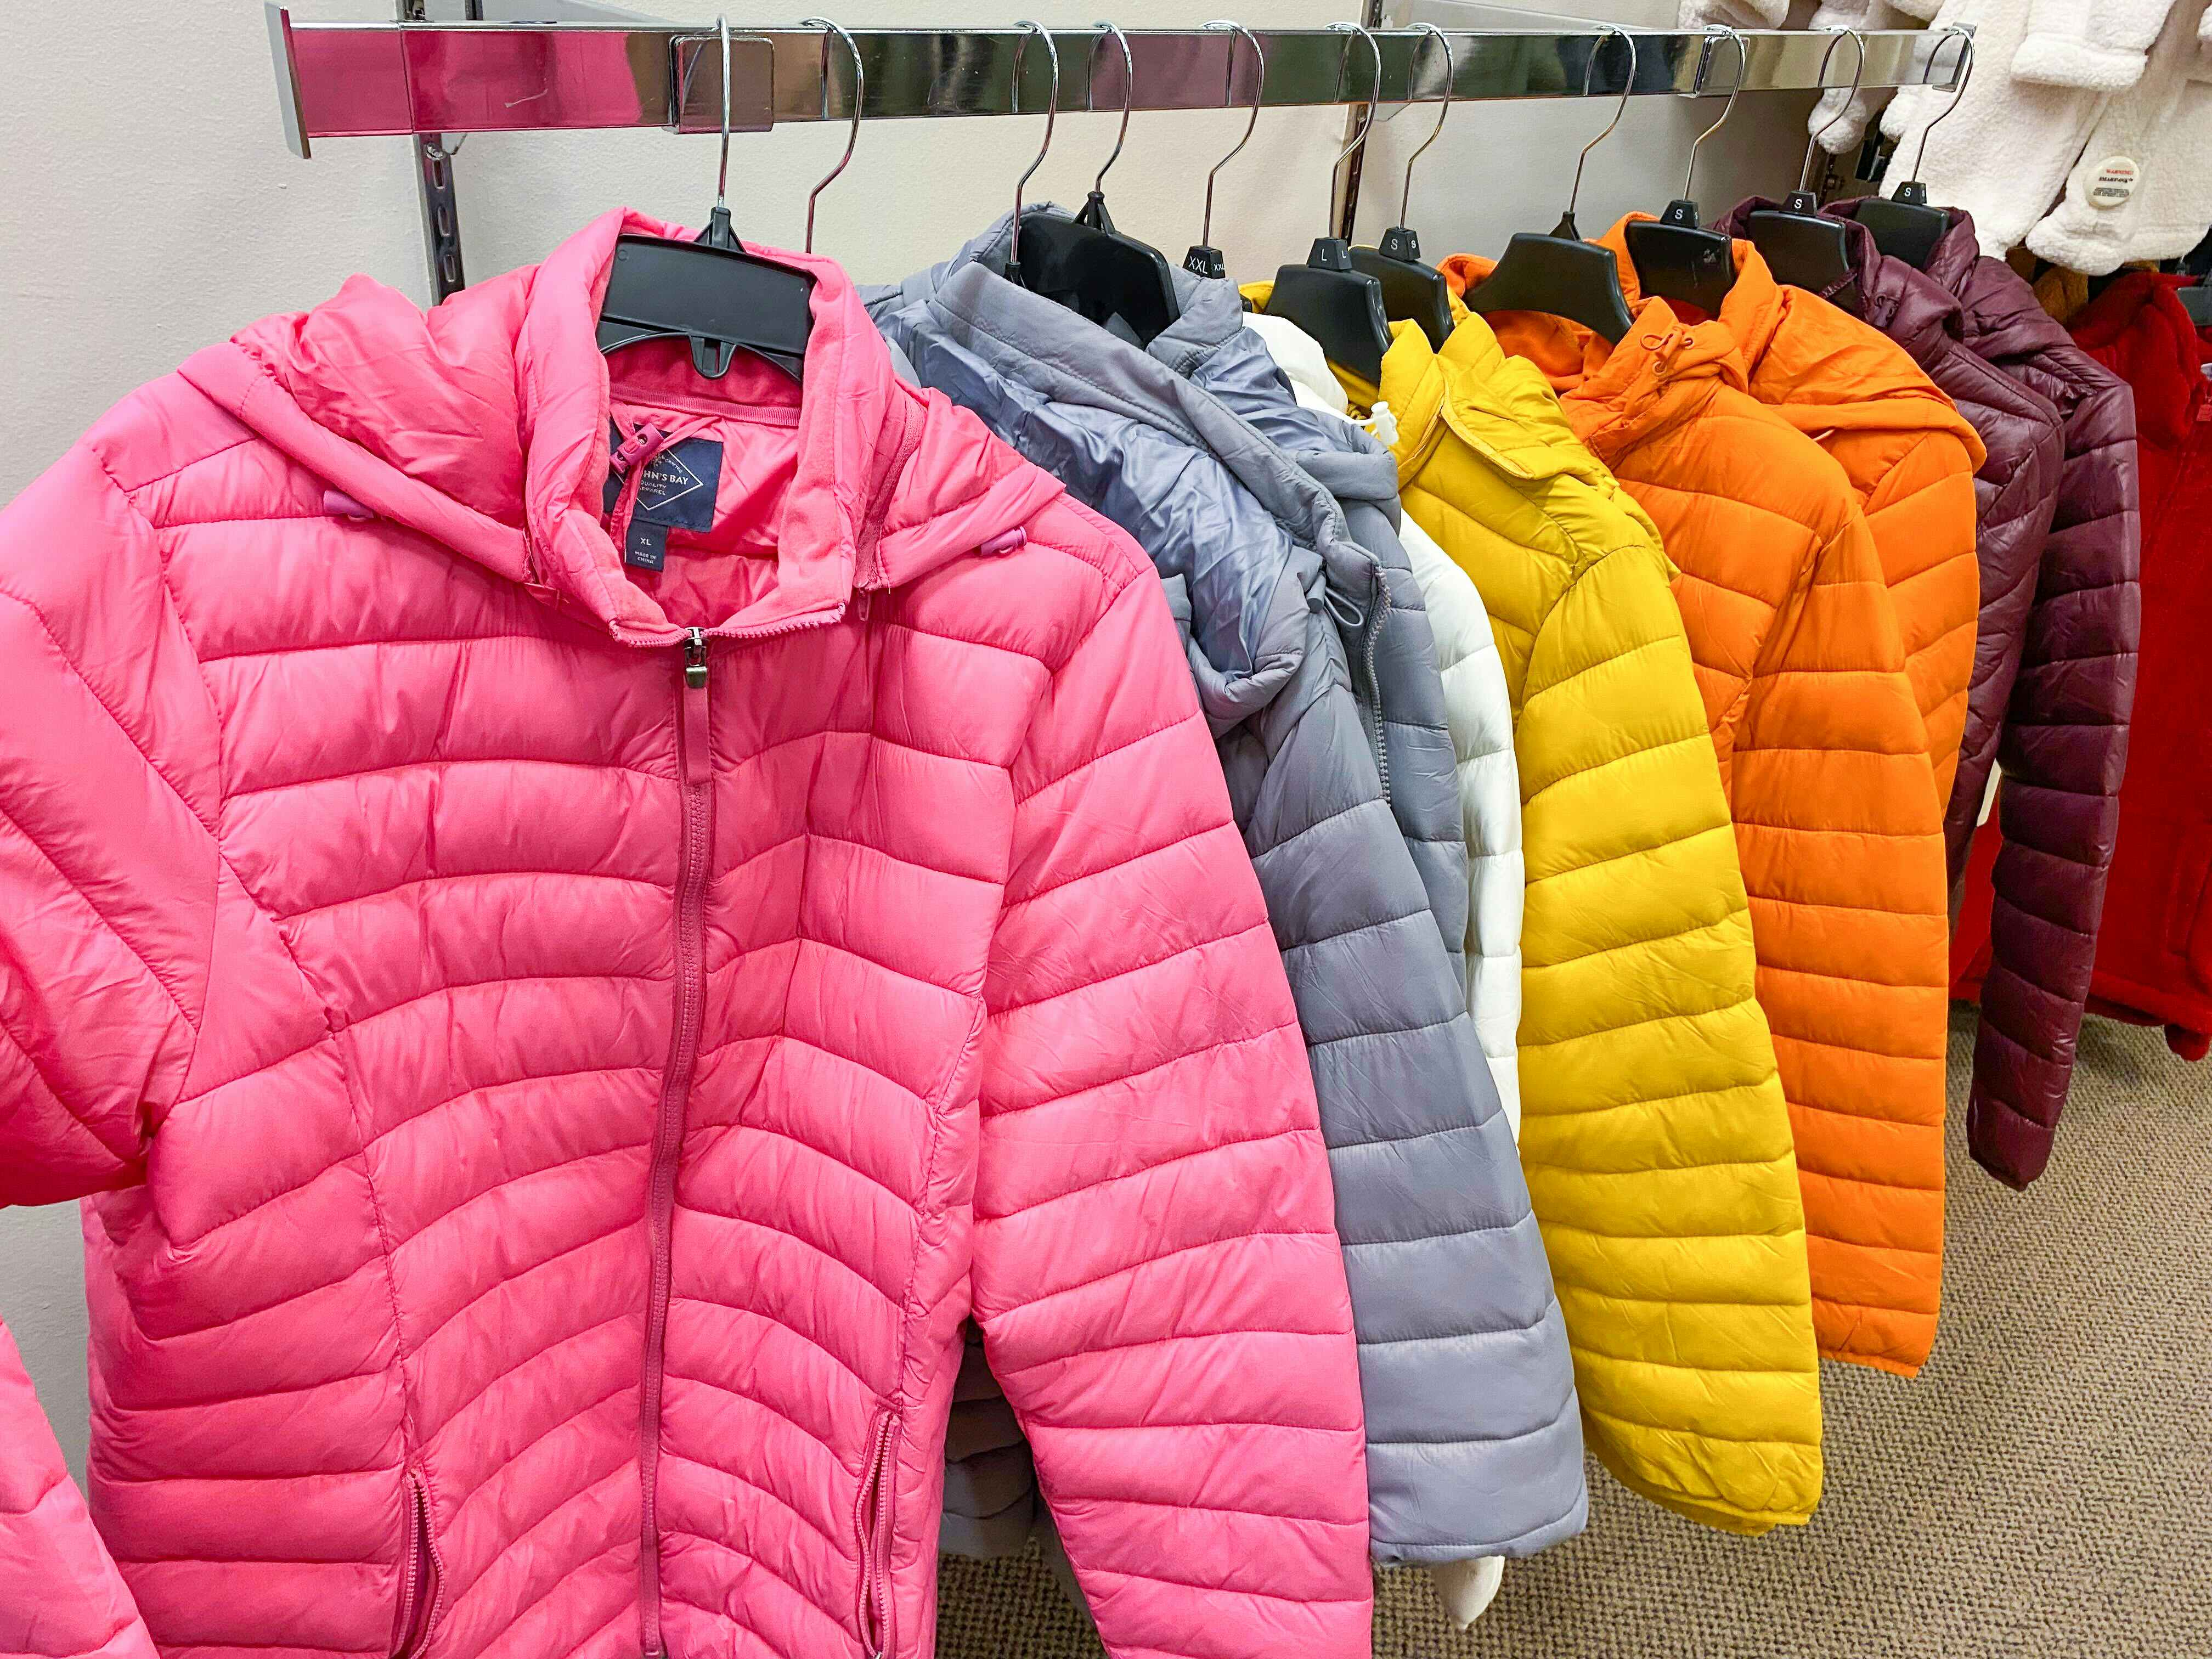 Winter Jacket in Winter Sale on a clothes rack. Women's coats on